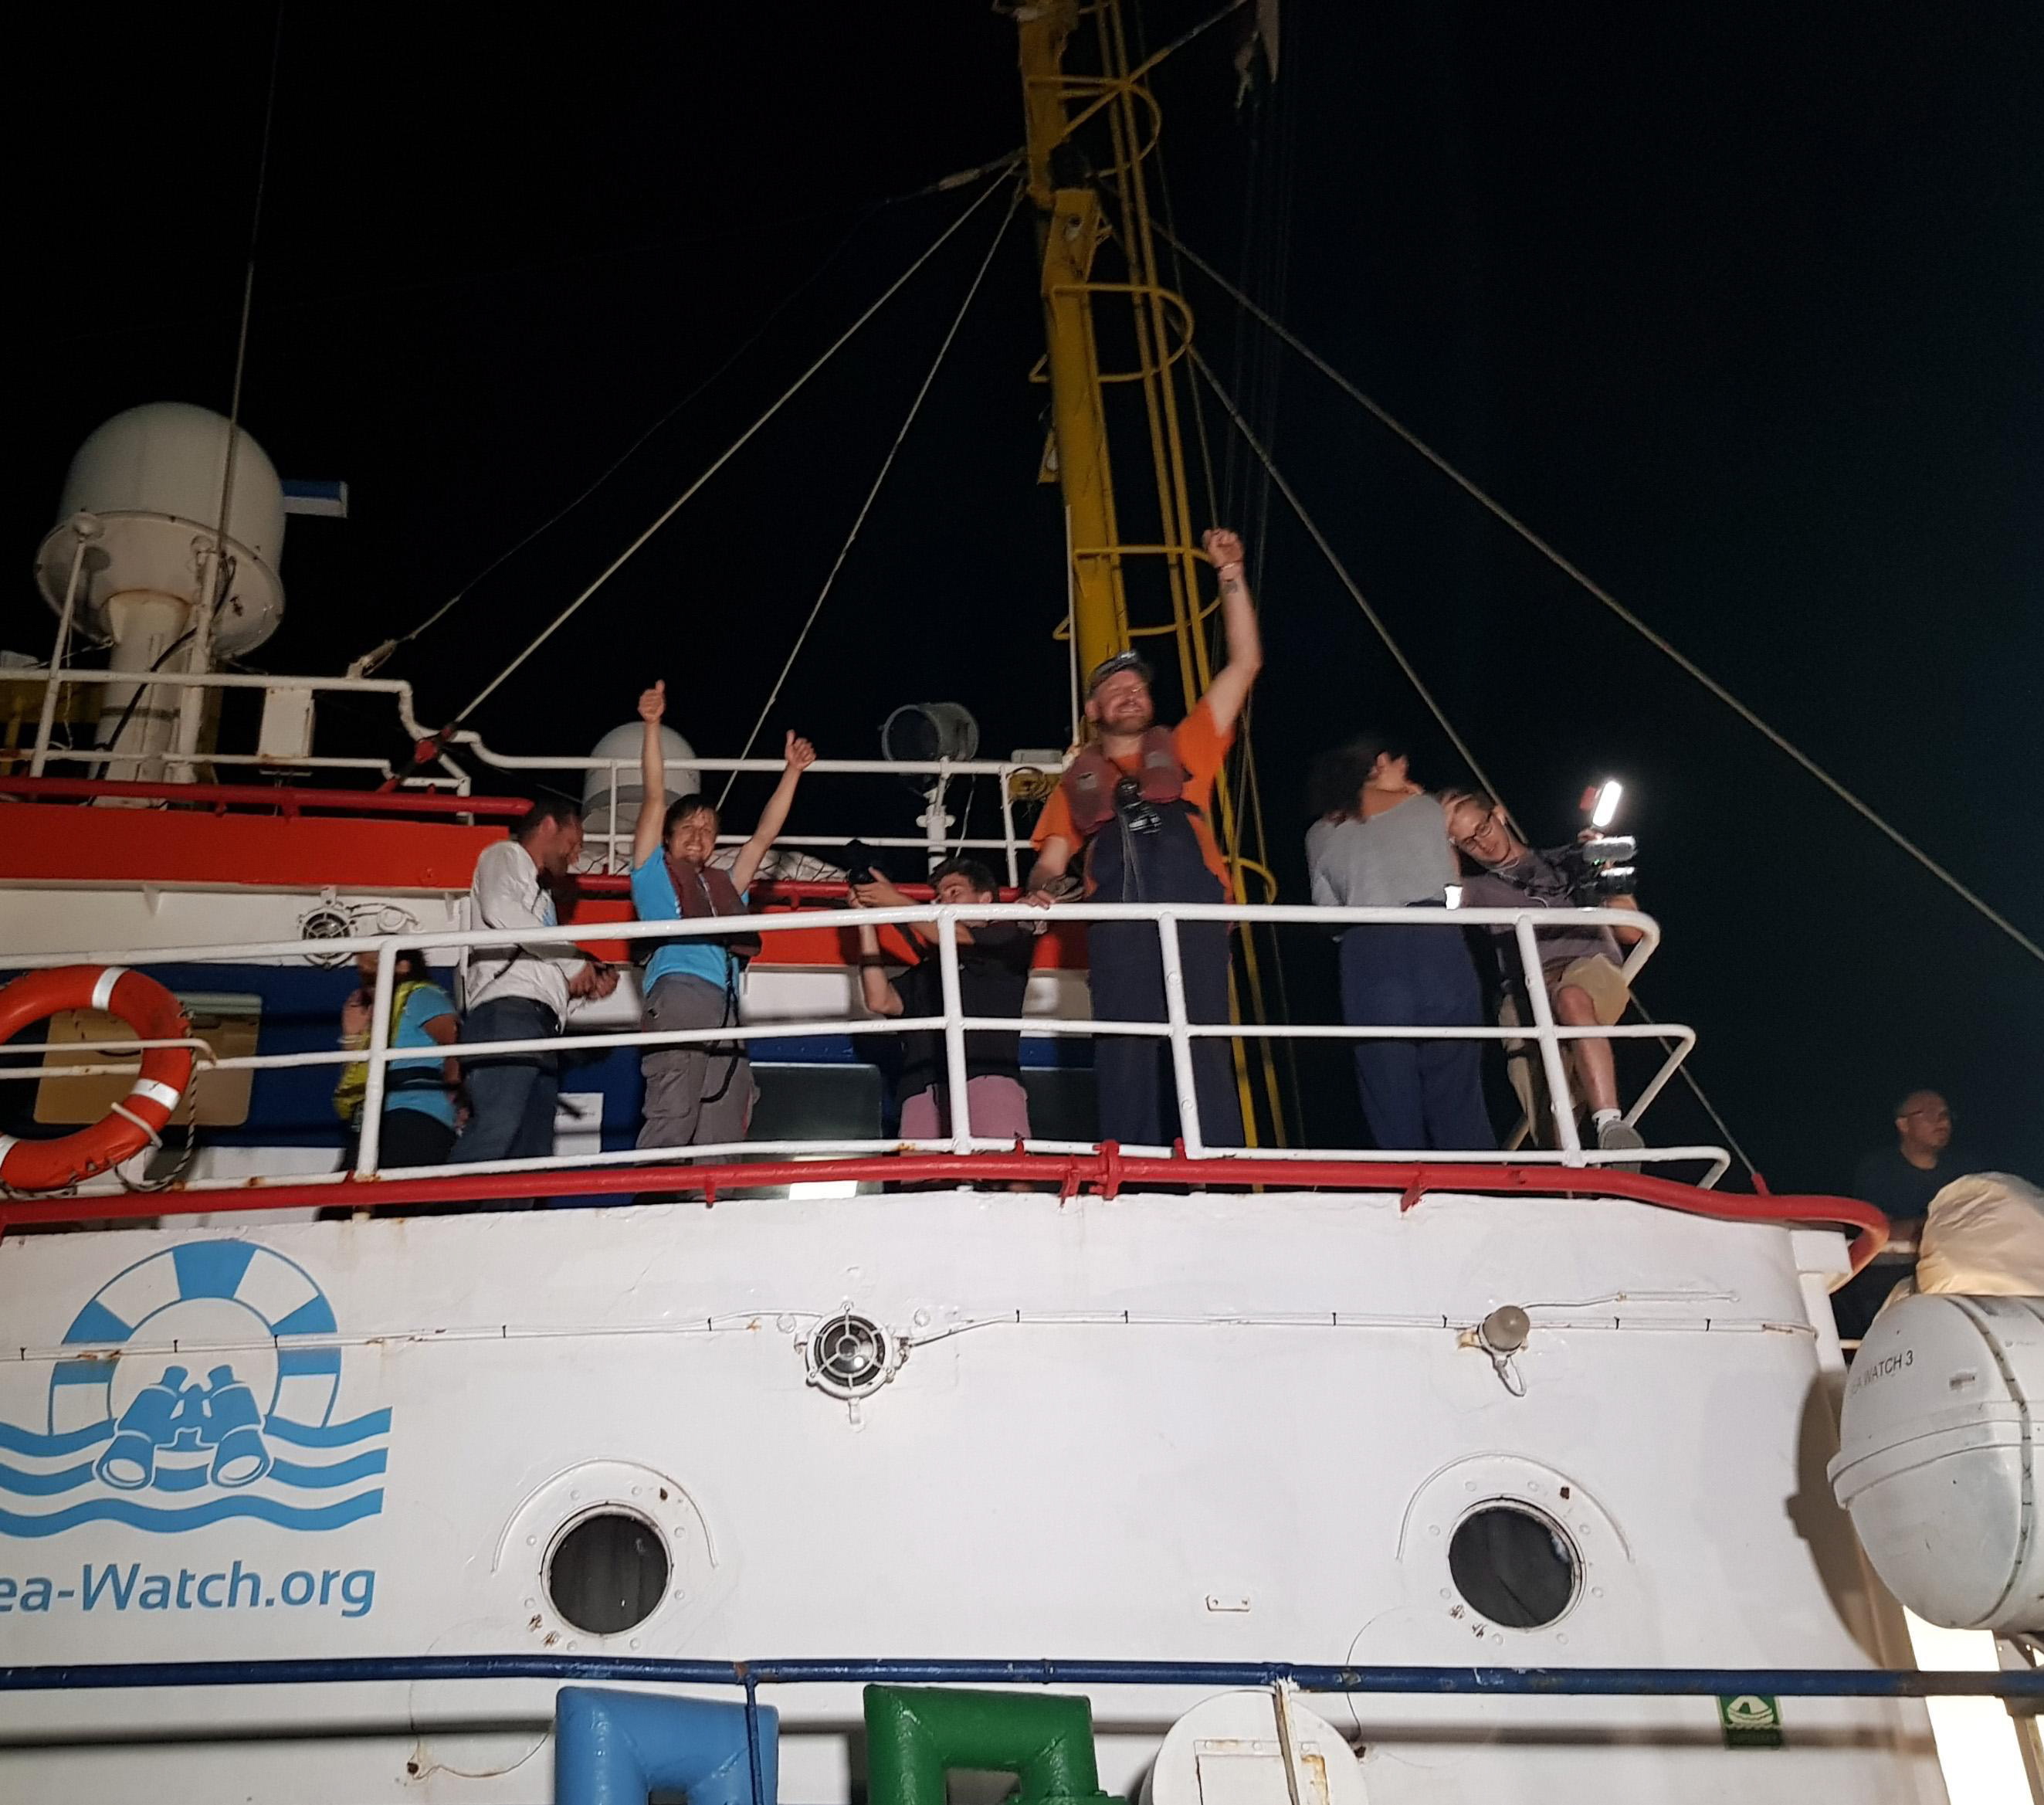 epa07681886 The Sea Watch 3 migrant rescue ship after arriving in the port of Lampedusa, Italy, 28 June 2019, issued 29 June 2019. According to reports, the captain Carola Rackete was arrested after entering the port without permission .  EPA/ELIO DESIDERIO